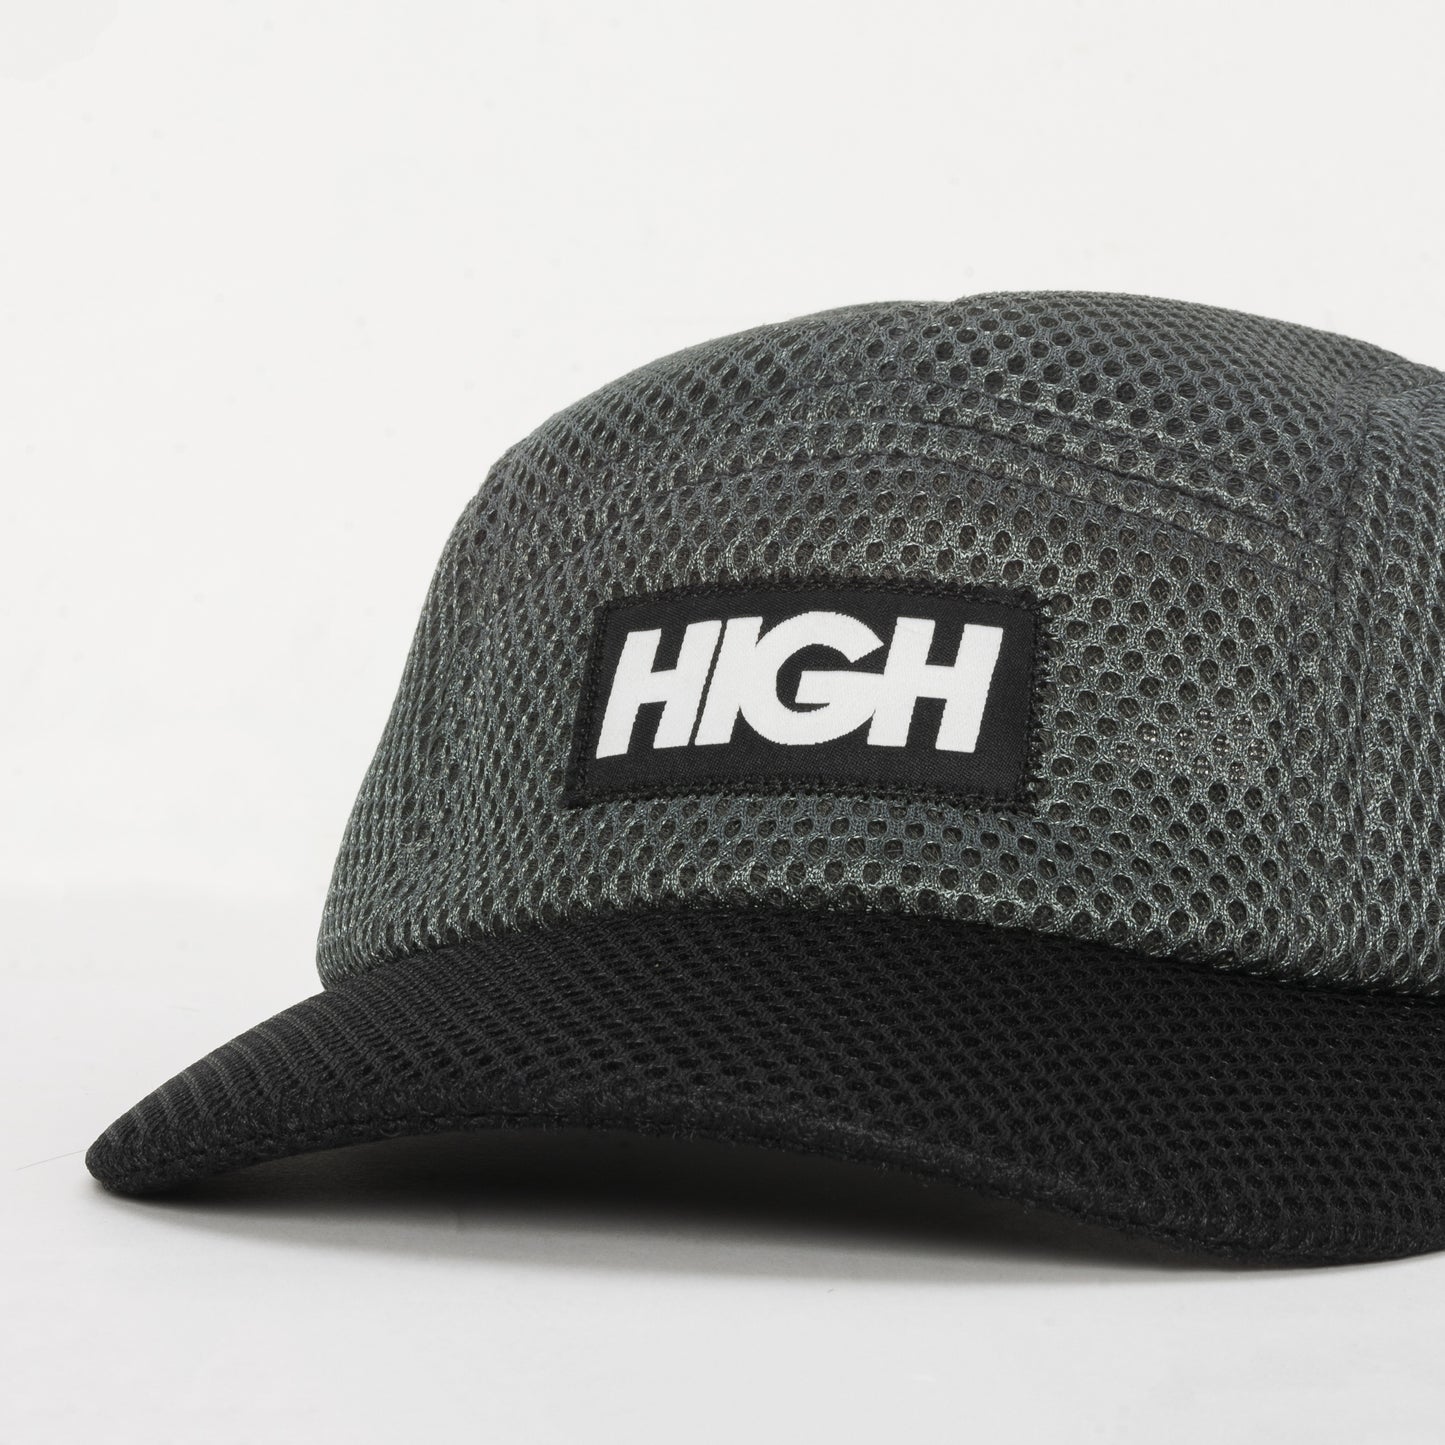 HIGH - 5 Panel Space Mesh "Black" - THE GAME